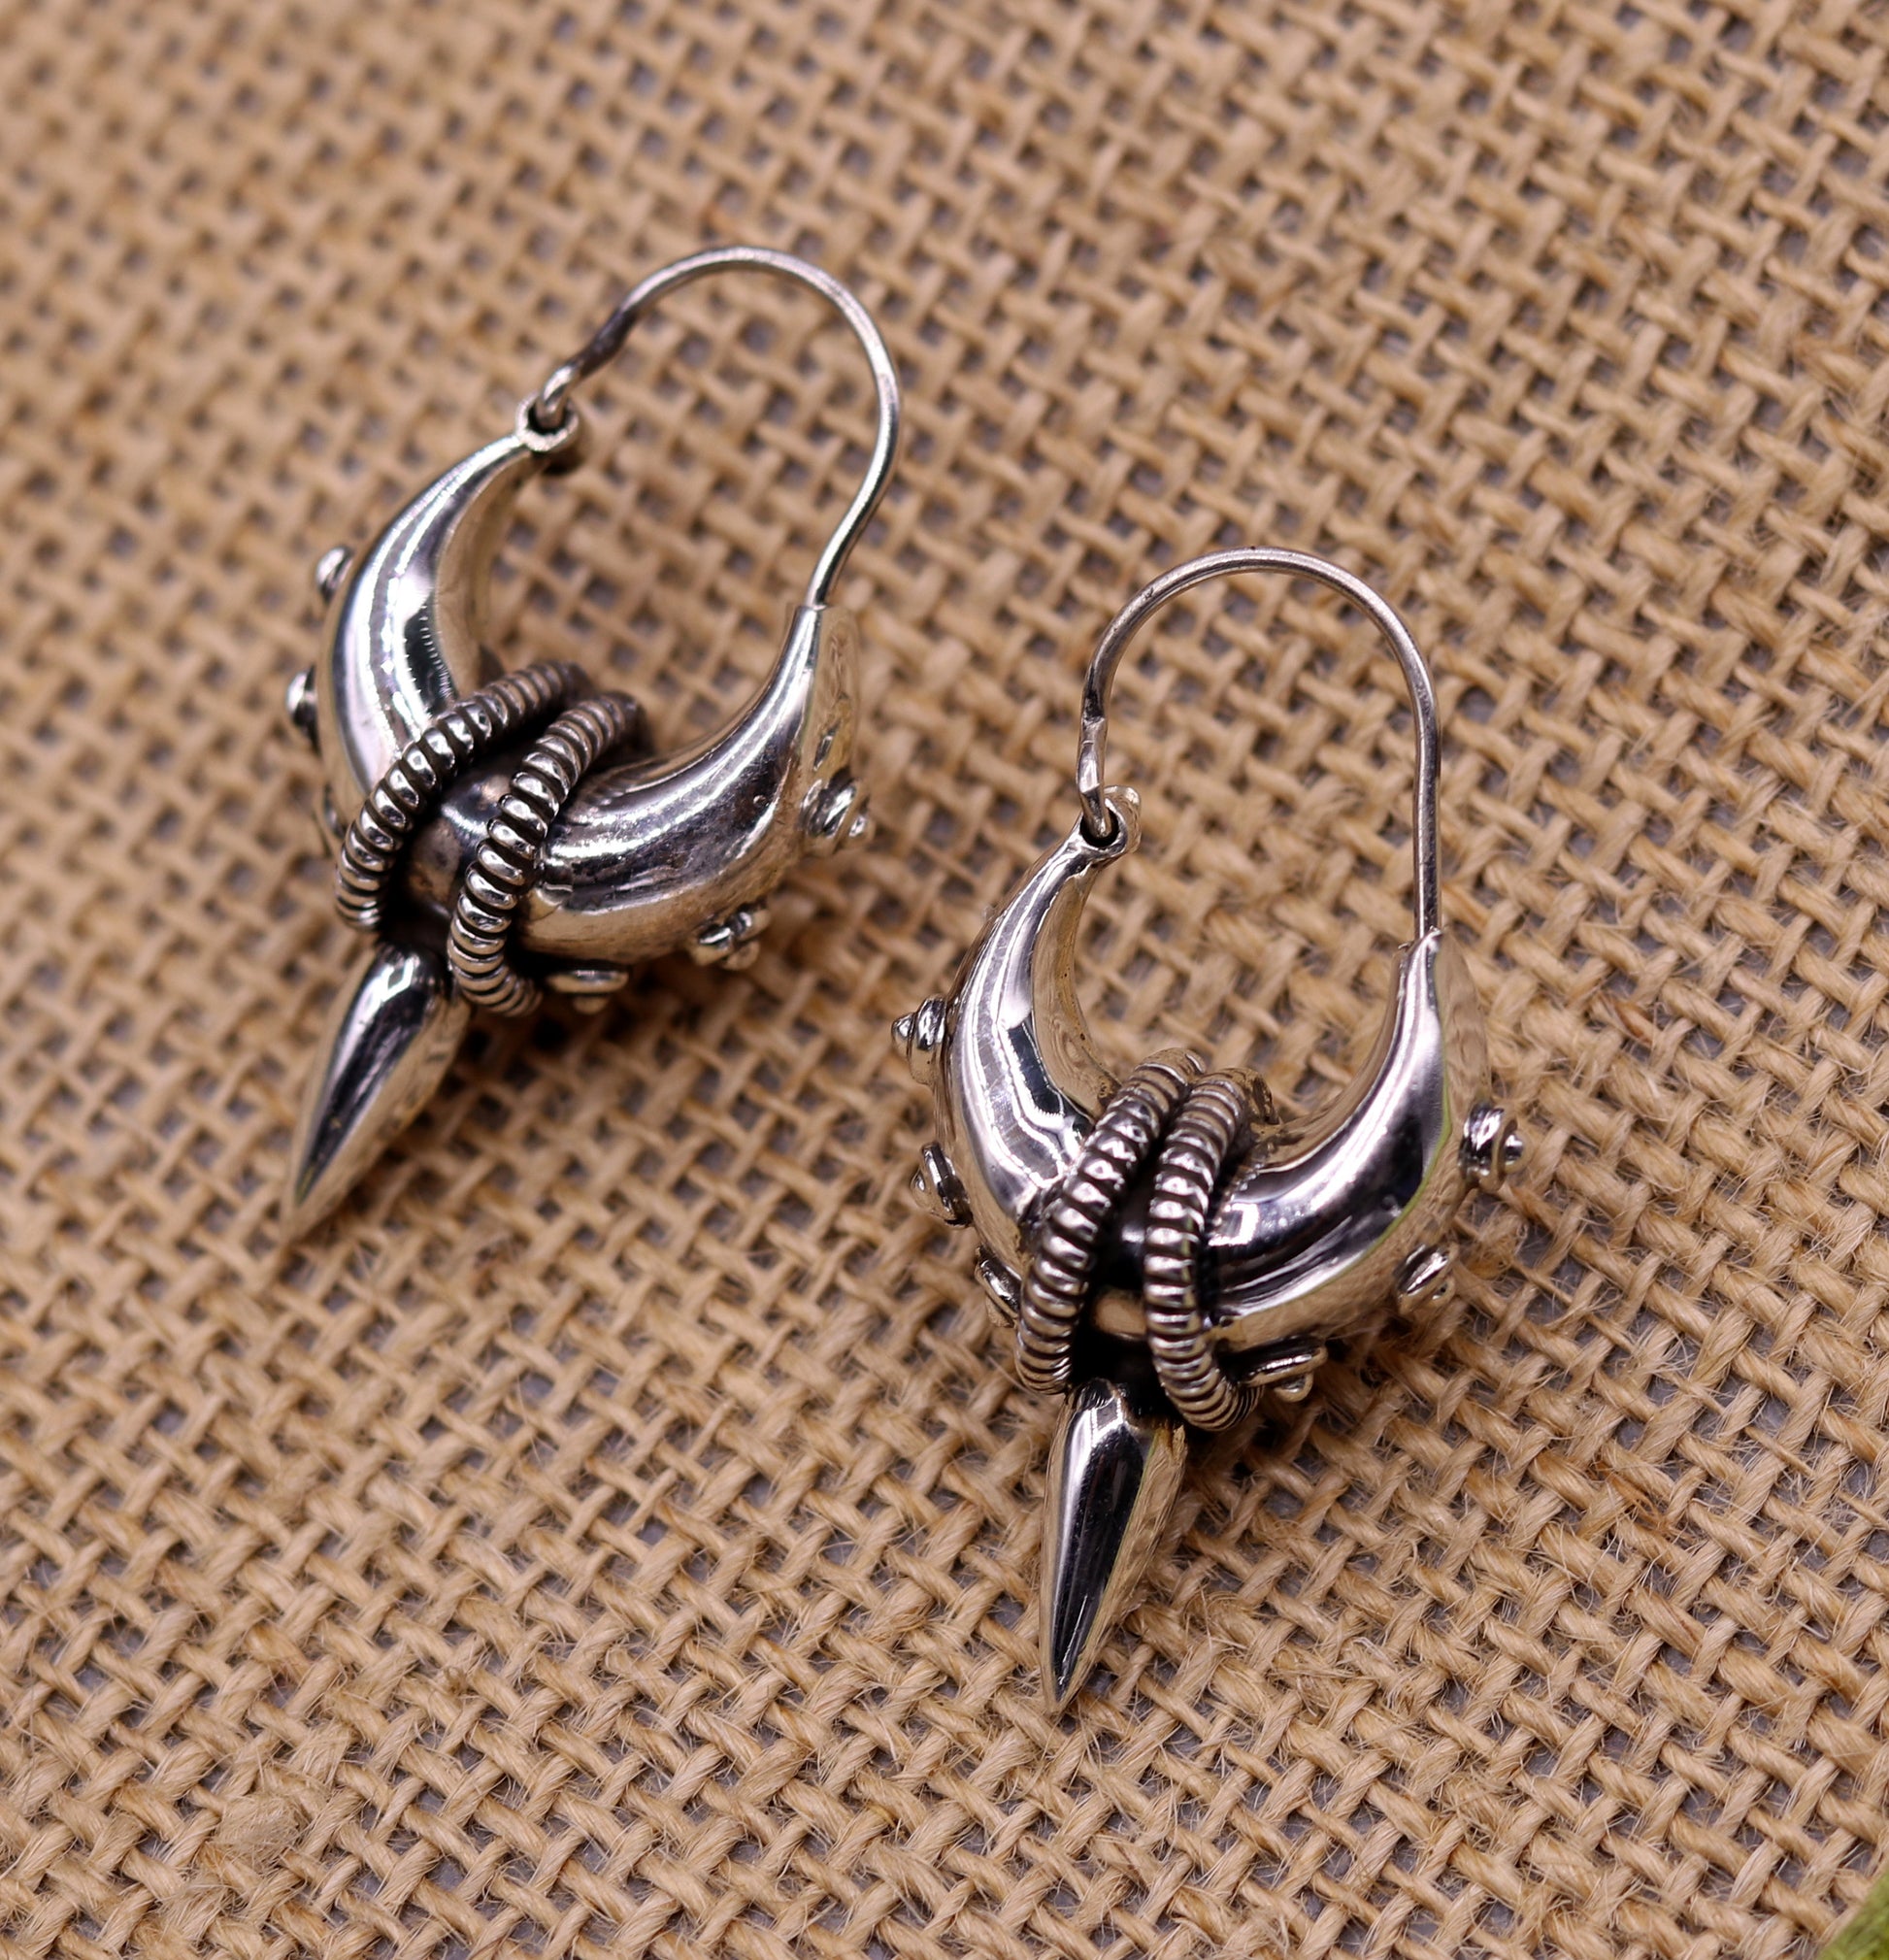 925 sterling silver handmade vintage ethnic style hoops earrings kundal,ethnic pretty bali tribal belly dance jewelry from india s590 - TRIBAL ORNAMENTS